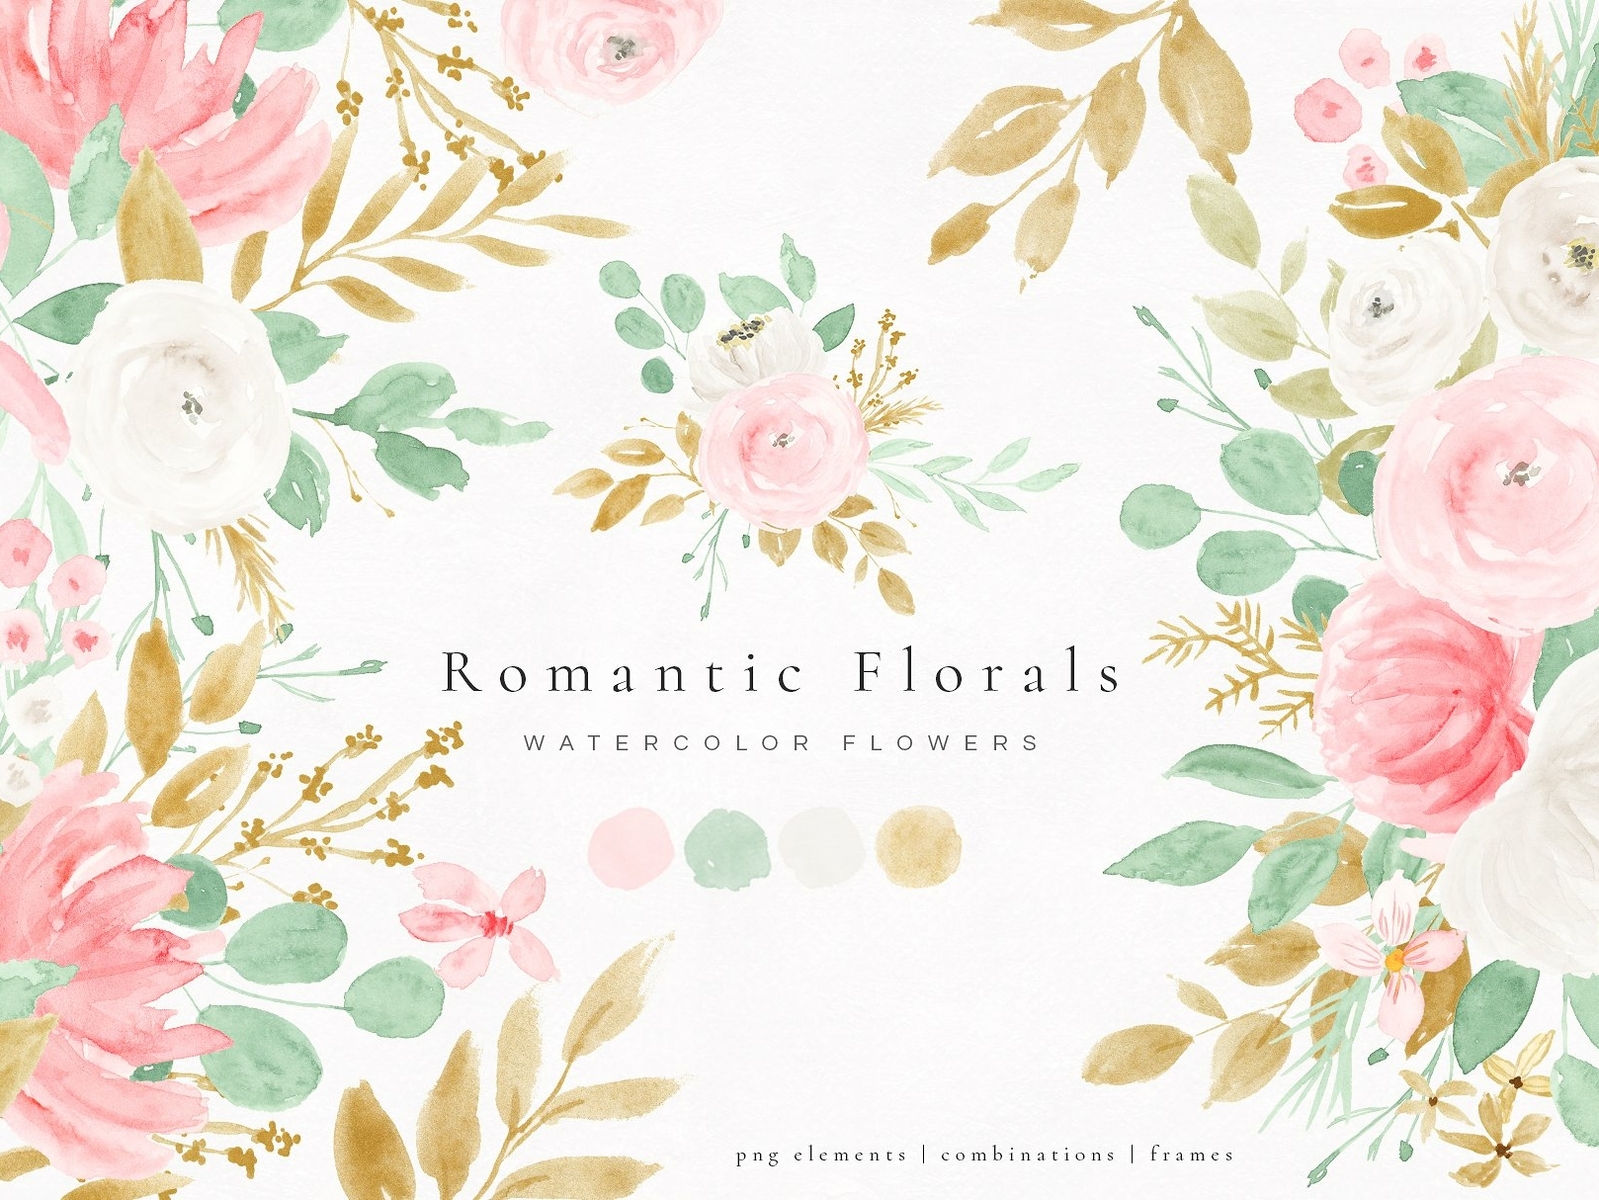 Download Romantic Florals Watercolor Flowers by Graphics Collection on Dribbble